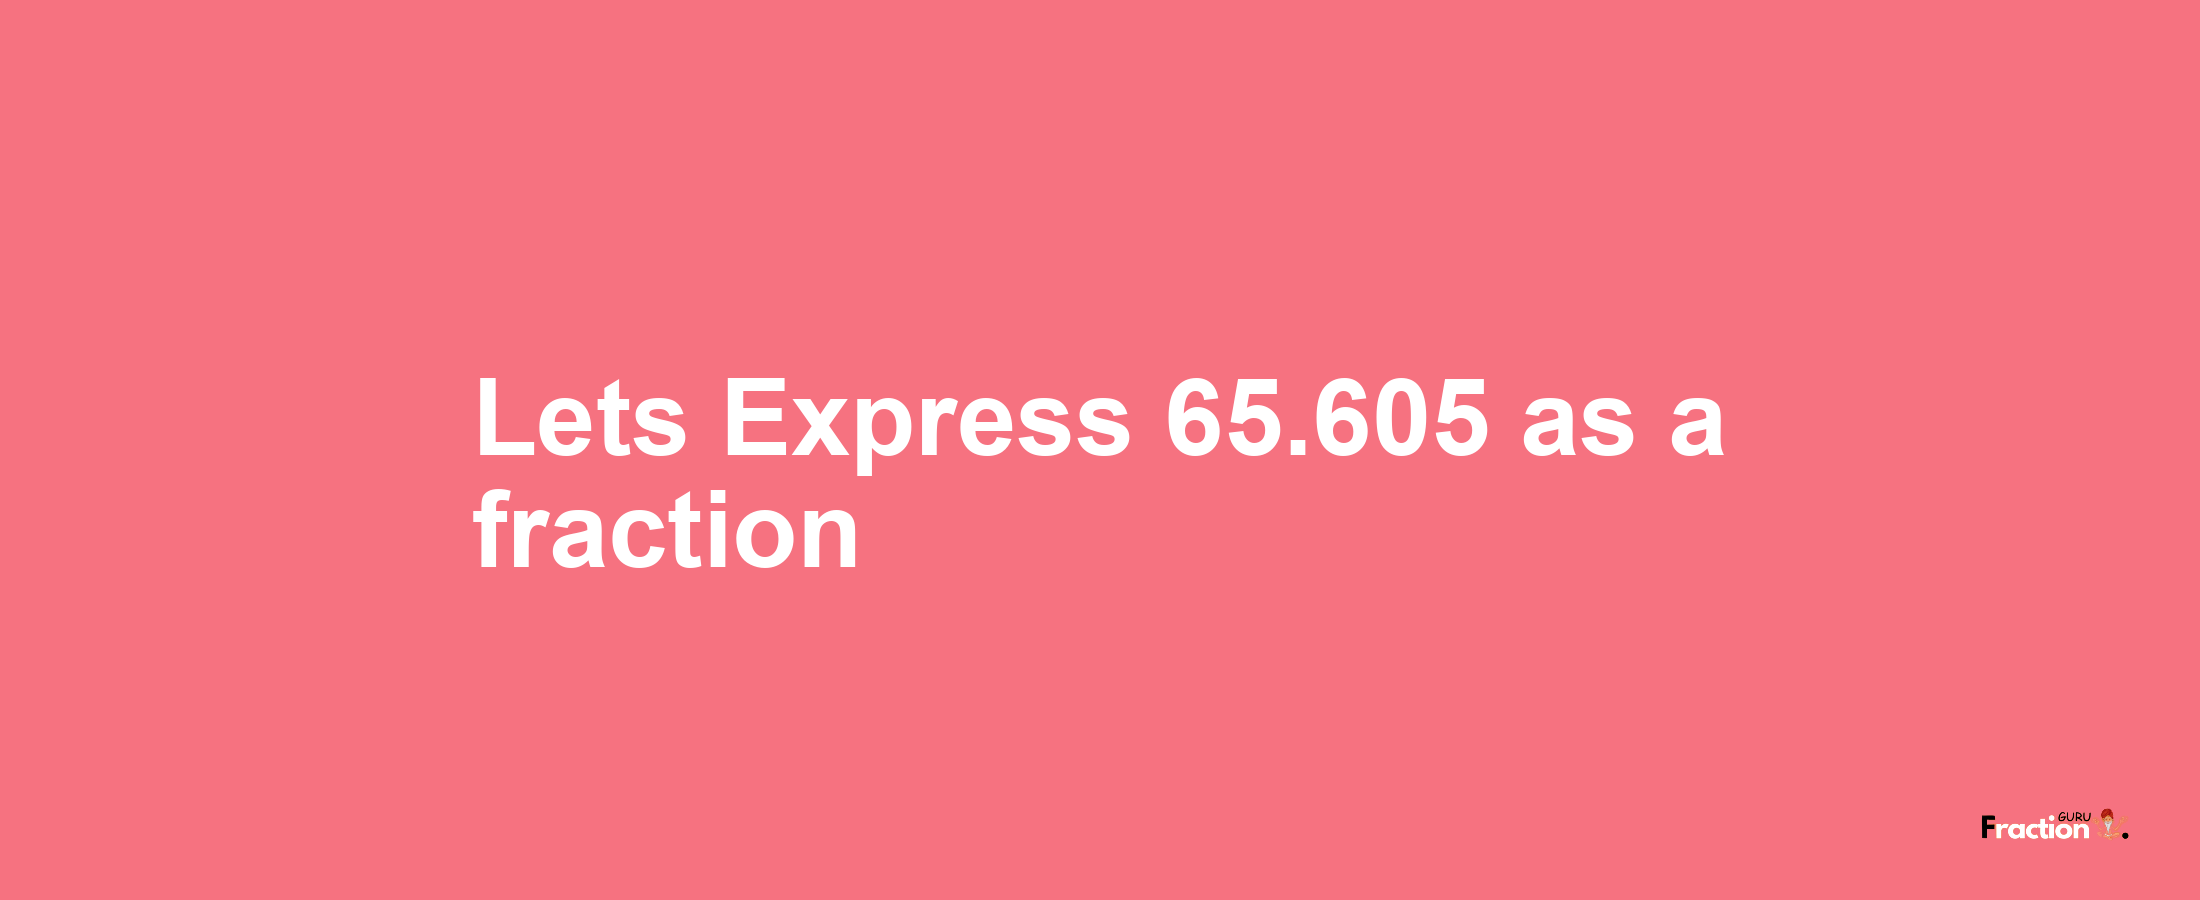 Lets Express 65.605 as afraction